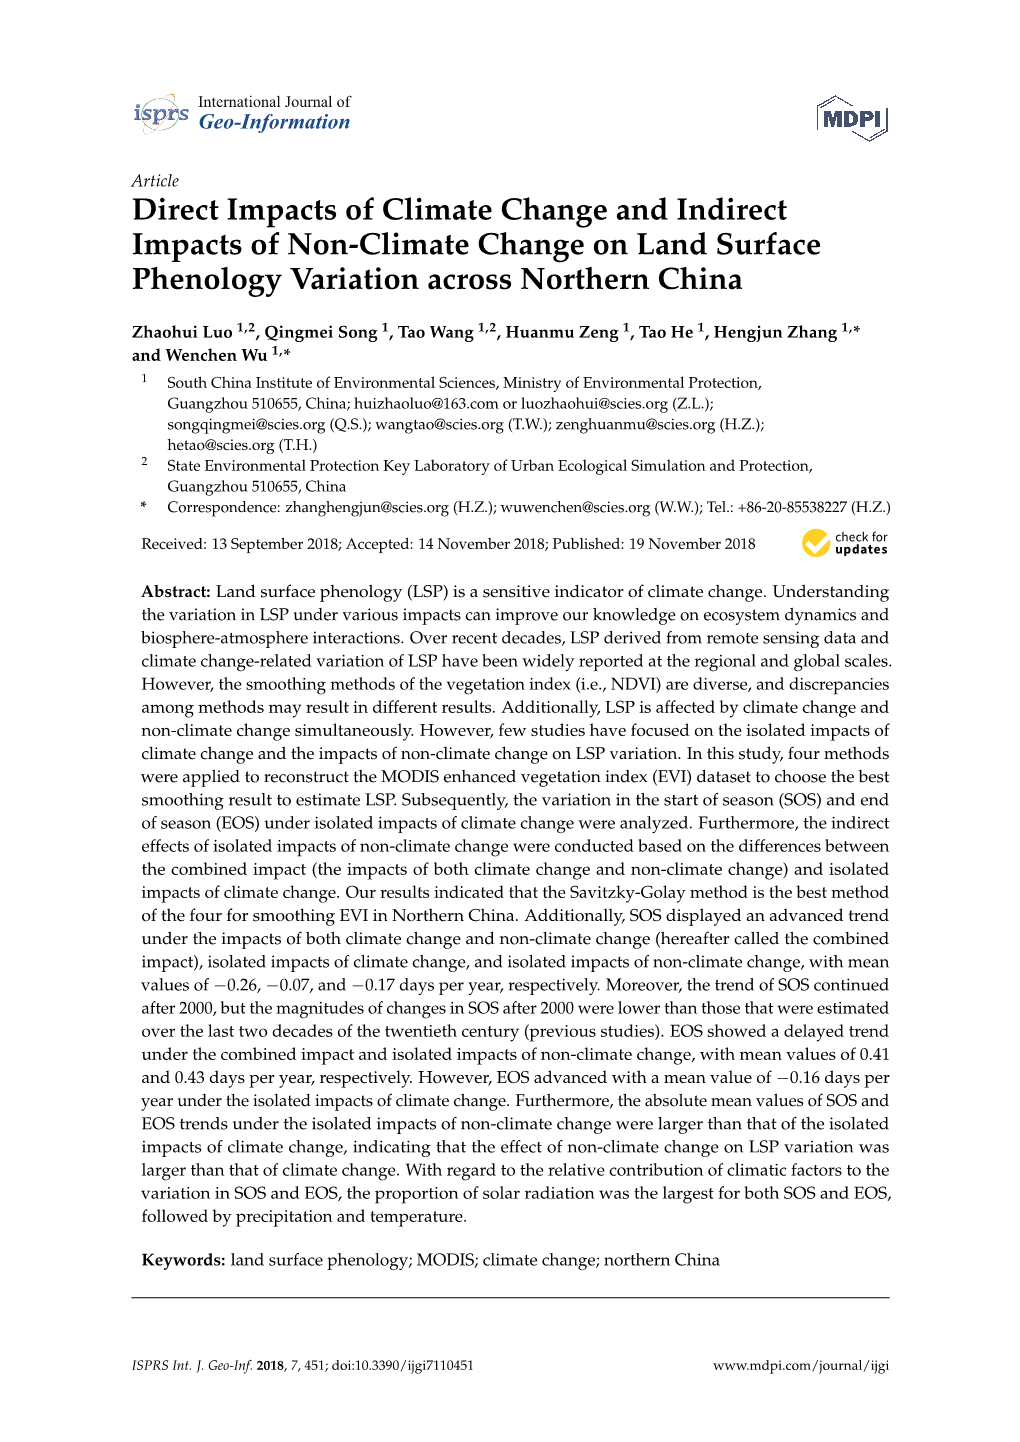 Direct Impacts of Climate Change and Indirect Impacts of Non-Climate Change on Land Surface Phenology Variation Across Northern China